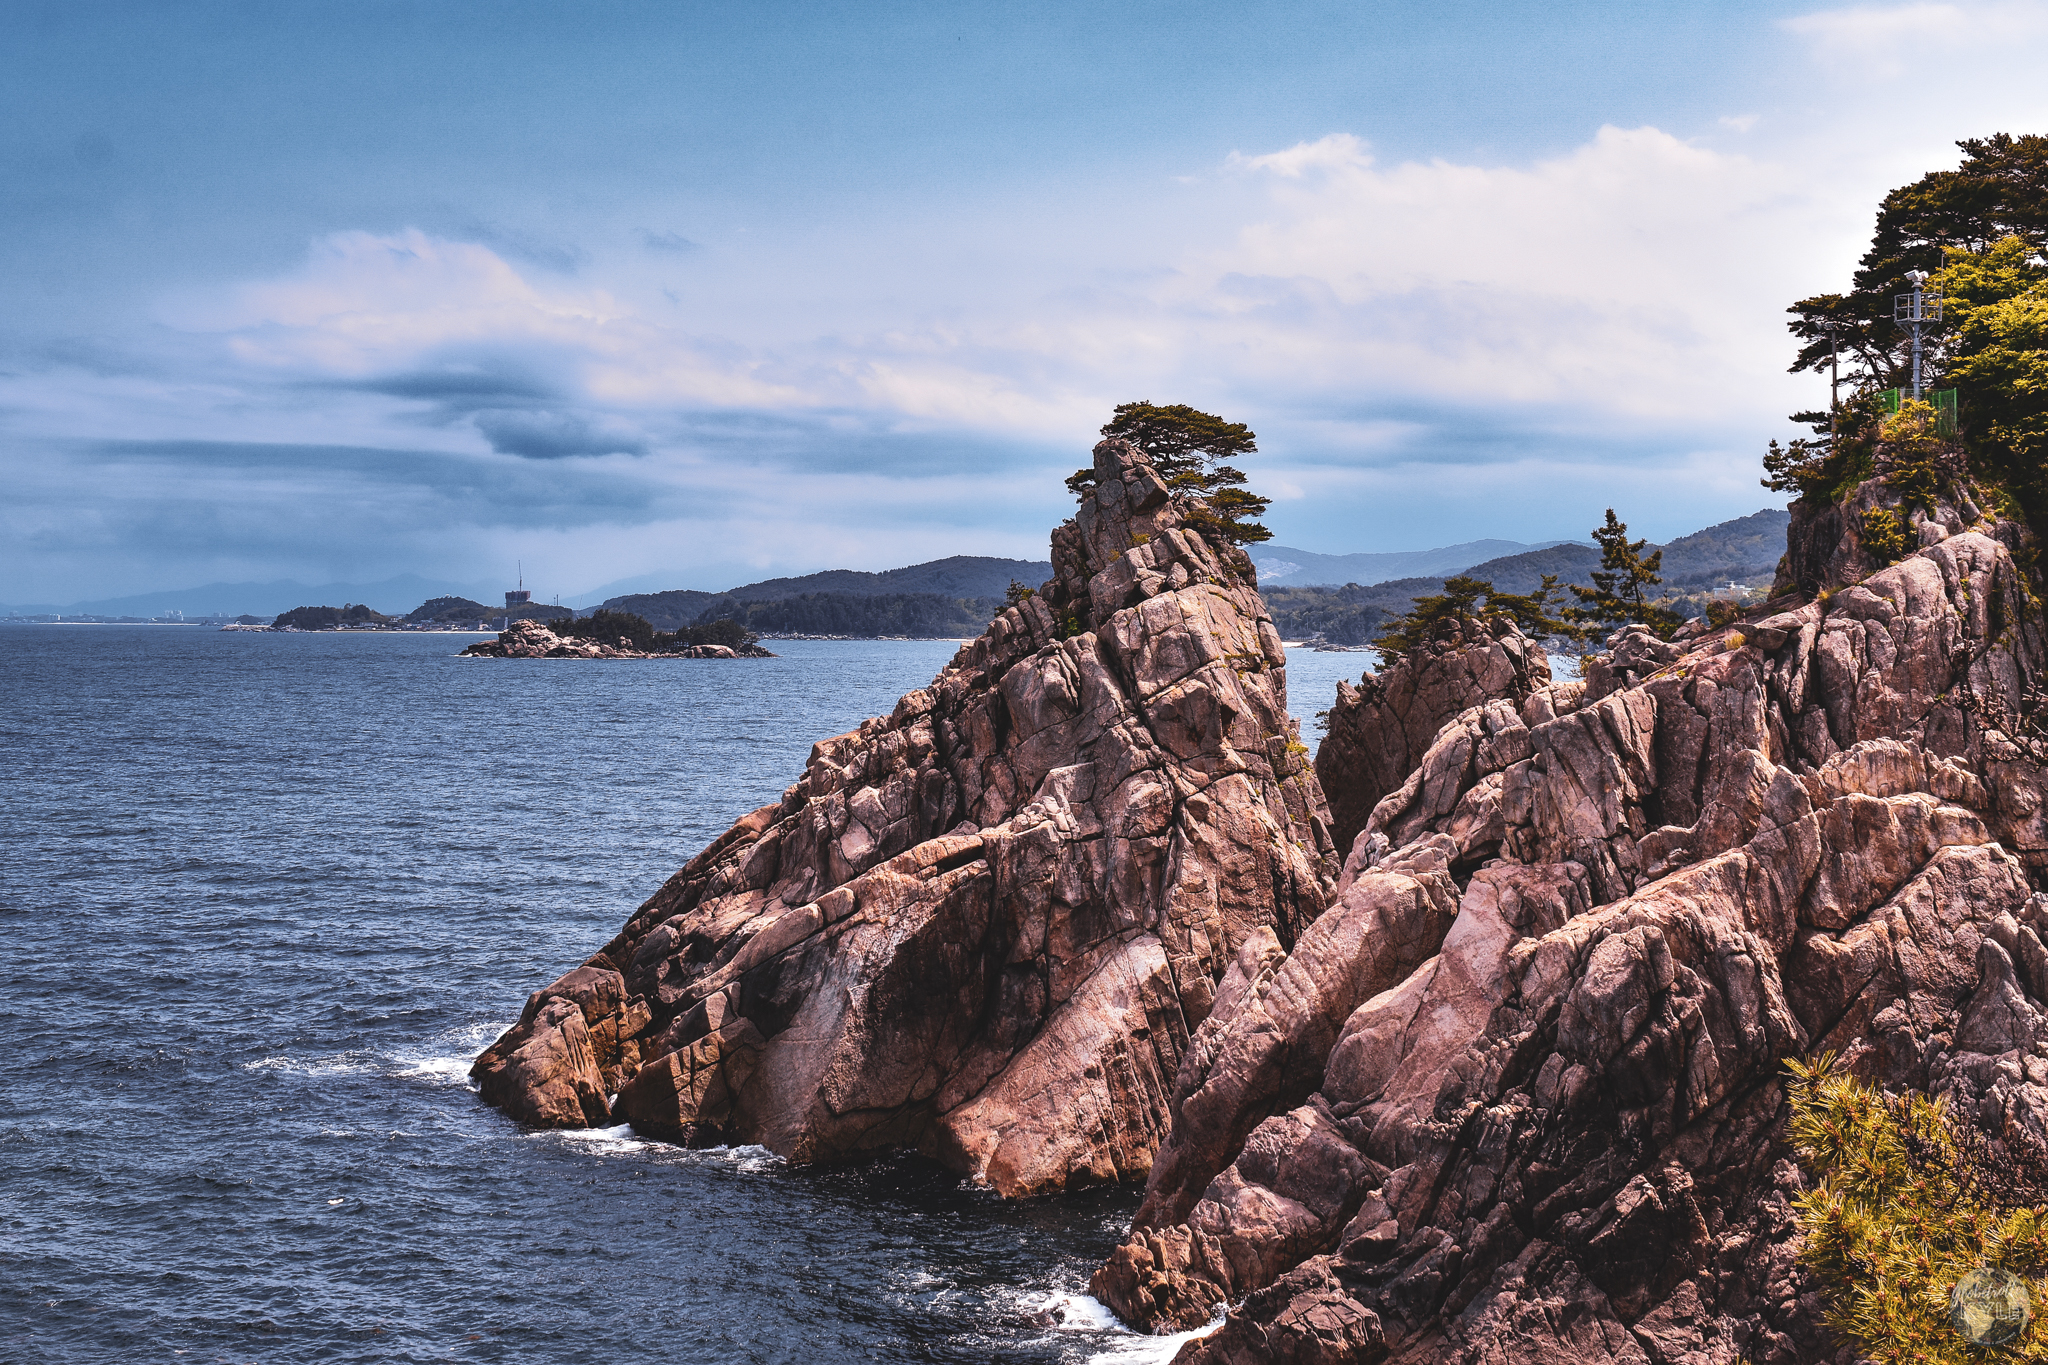 A single pine tree sits perched on top of a sea cliff near the Hajodae beach and Hajodae Lighthouse in Yangyang, South Korea Guide for Sokcho and Seoraksan